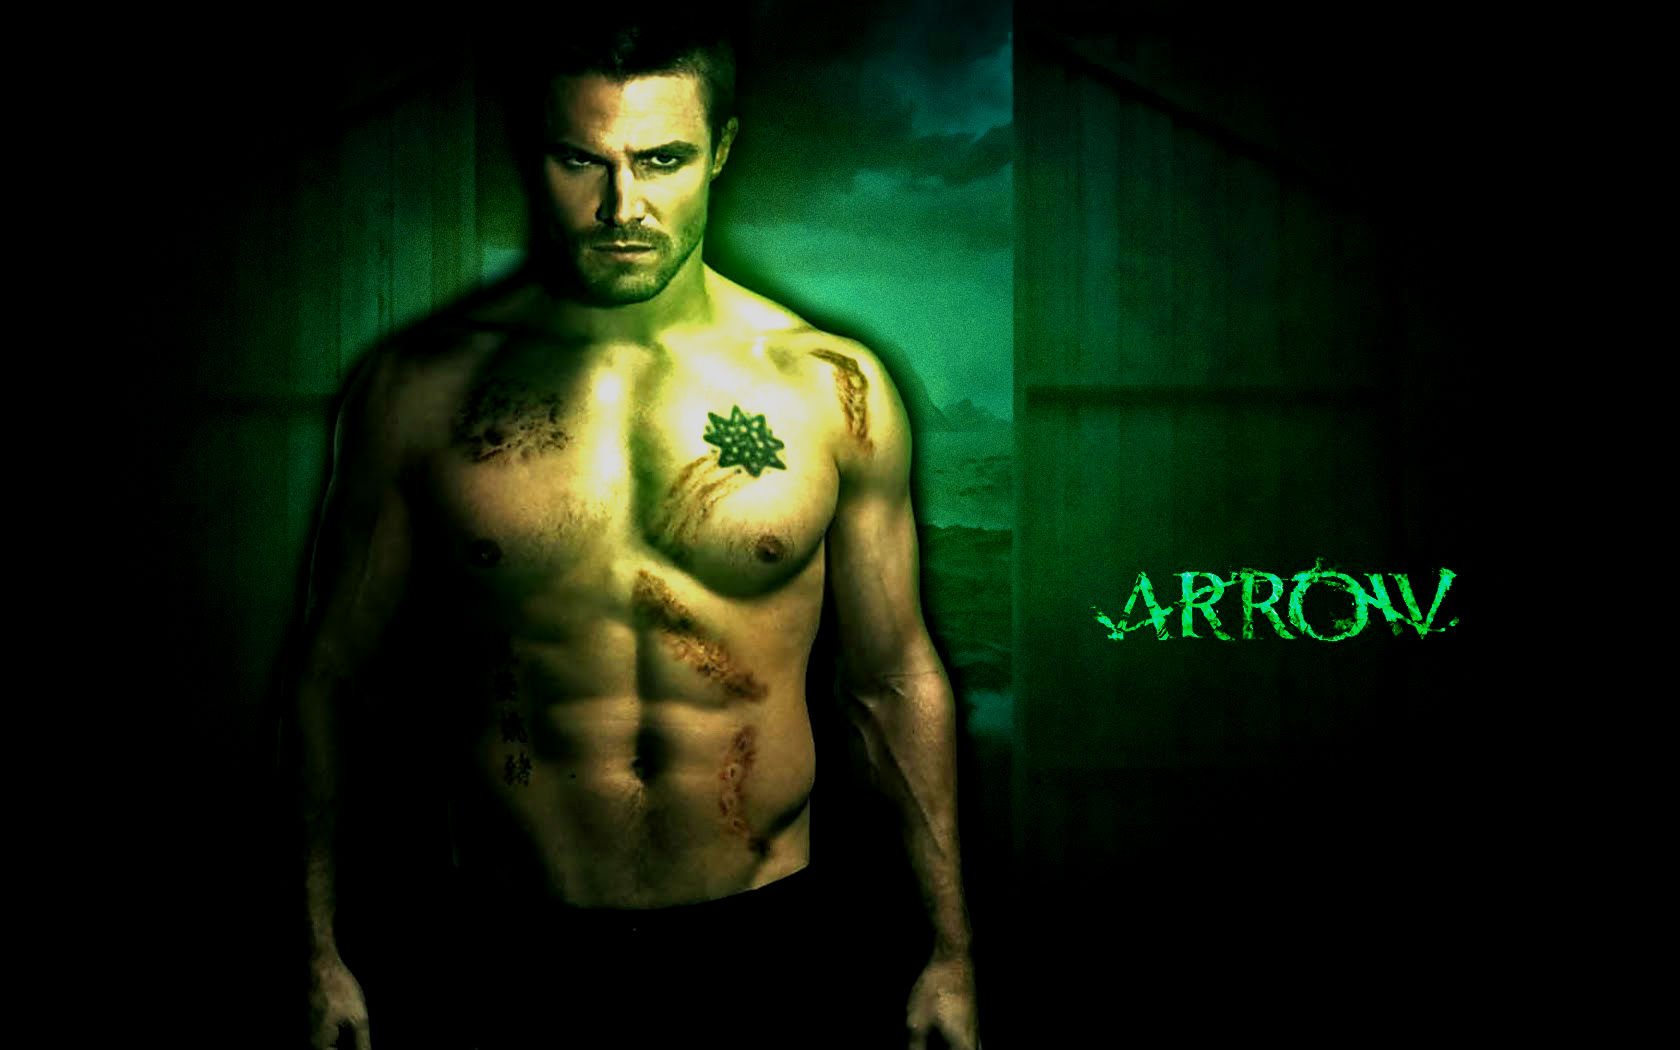 arrow, Green, Action, Adventure, Crime, Television, Series, Poster Wallpaper